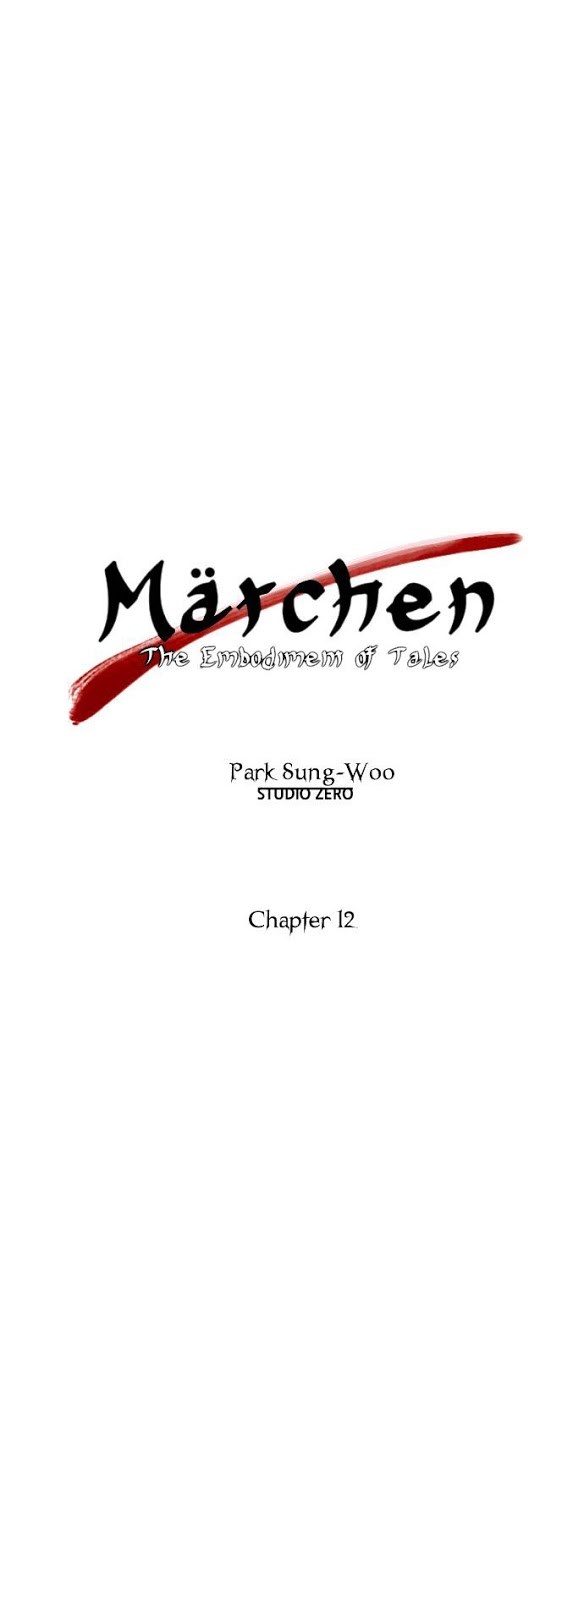 Märchen The Embodiment of Tales Chapter 12